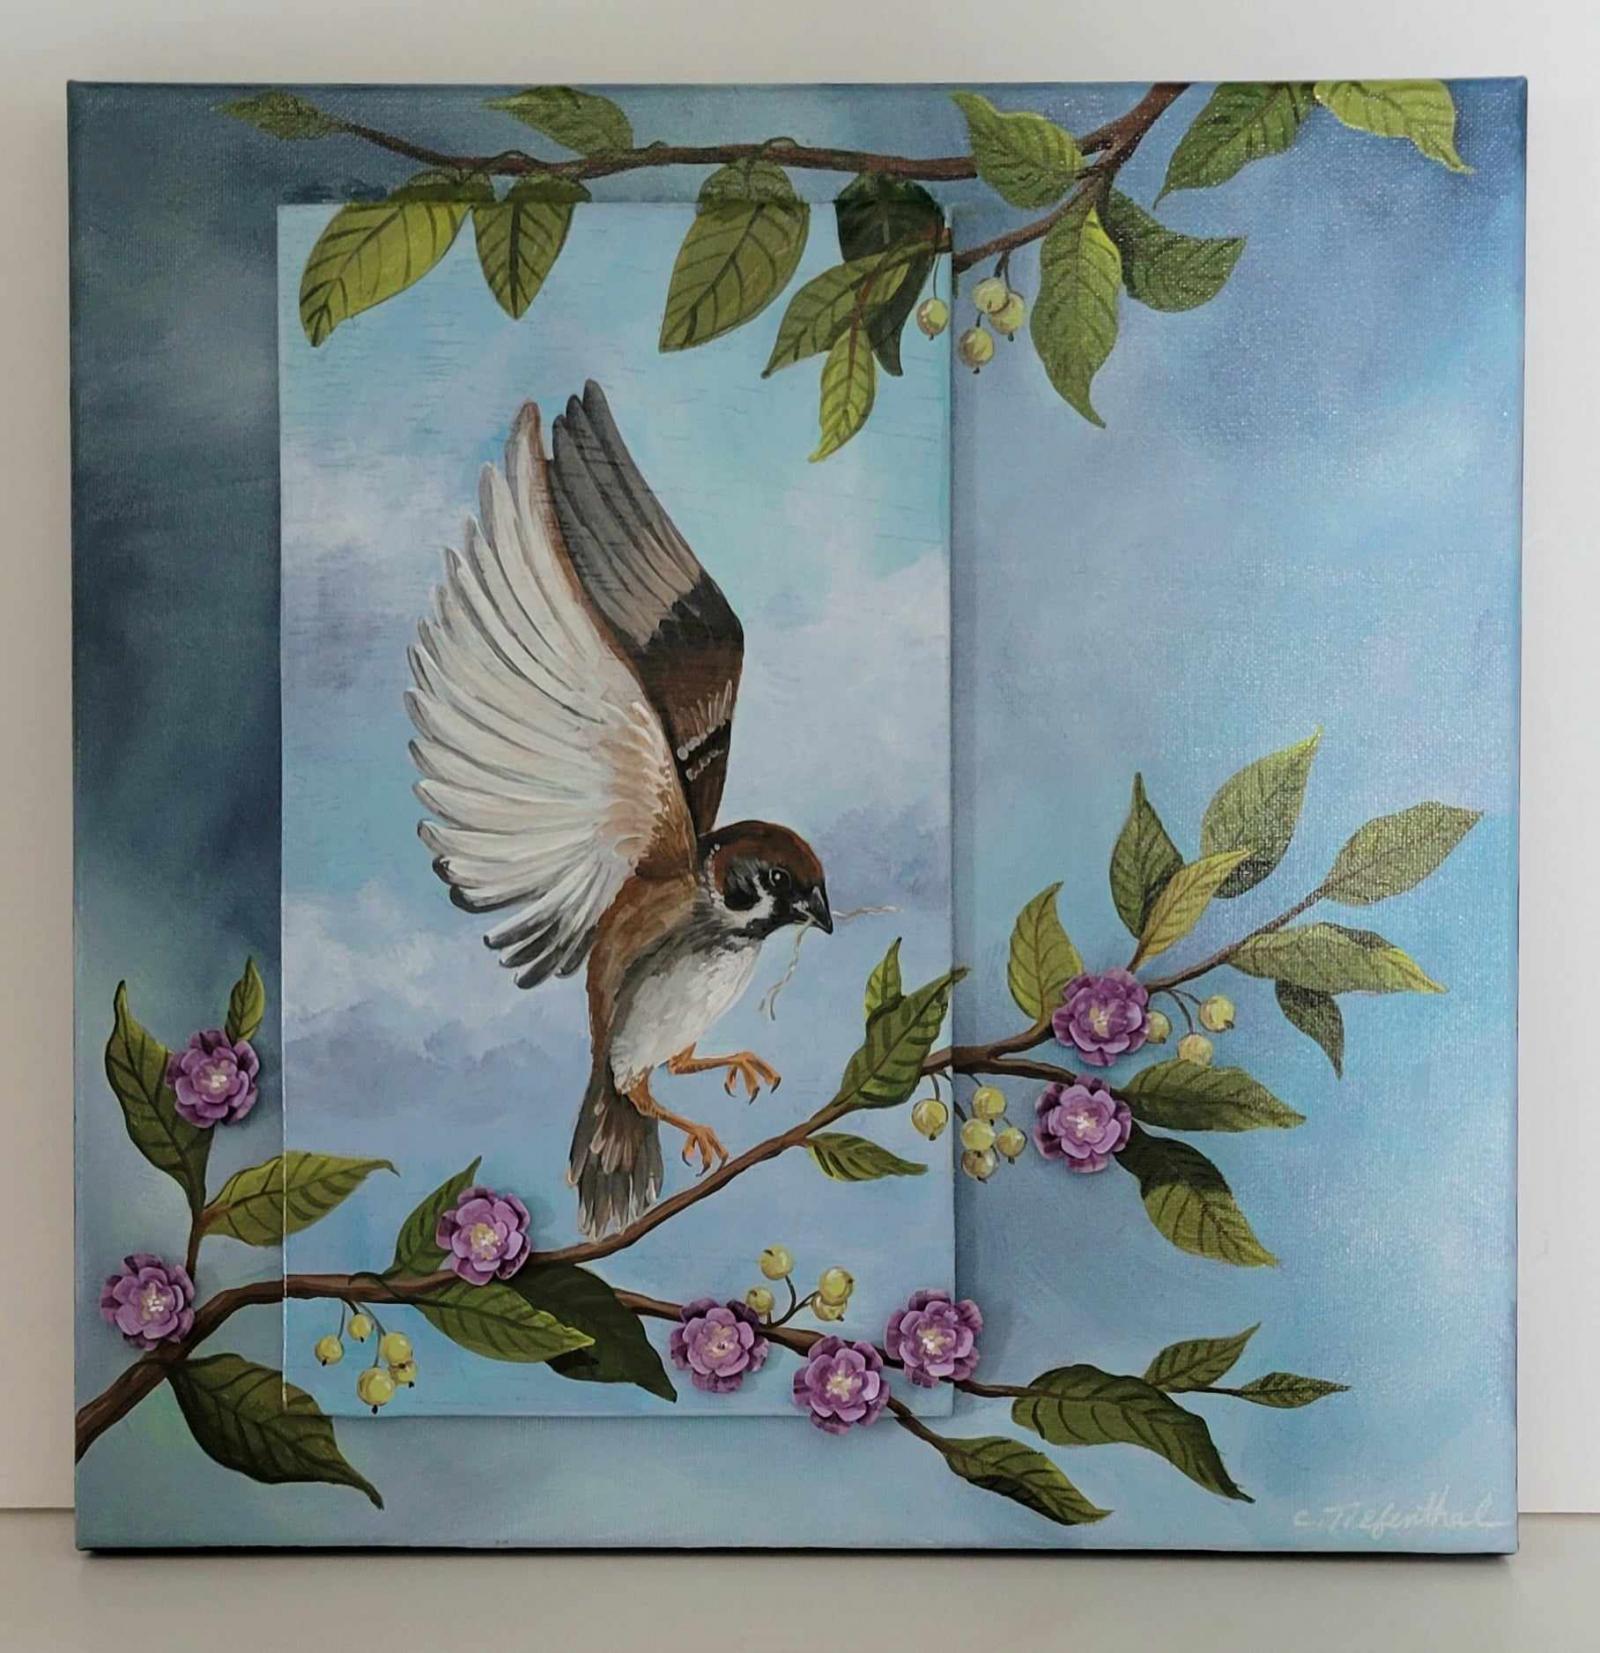 This acrylic painting on canvas has an attached wooden panel. The hinges used to attach the panel are canvas. The panel lifts to reveal an additional image of a nest and a poem about family.